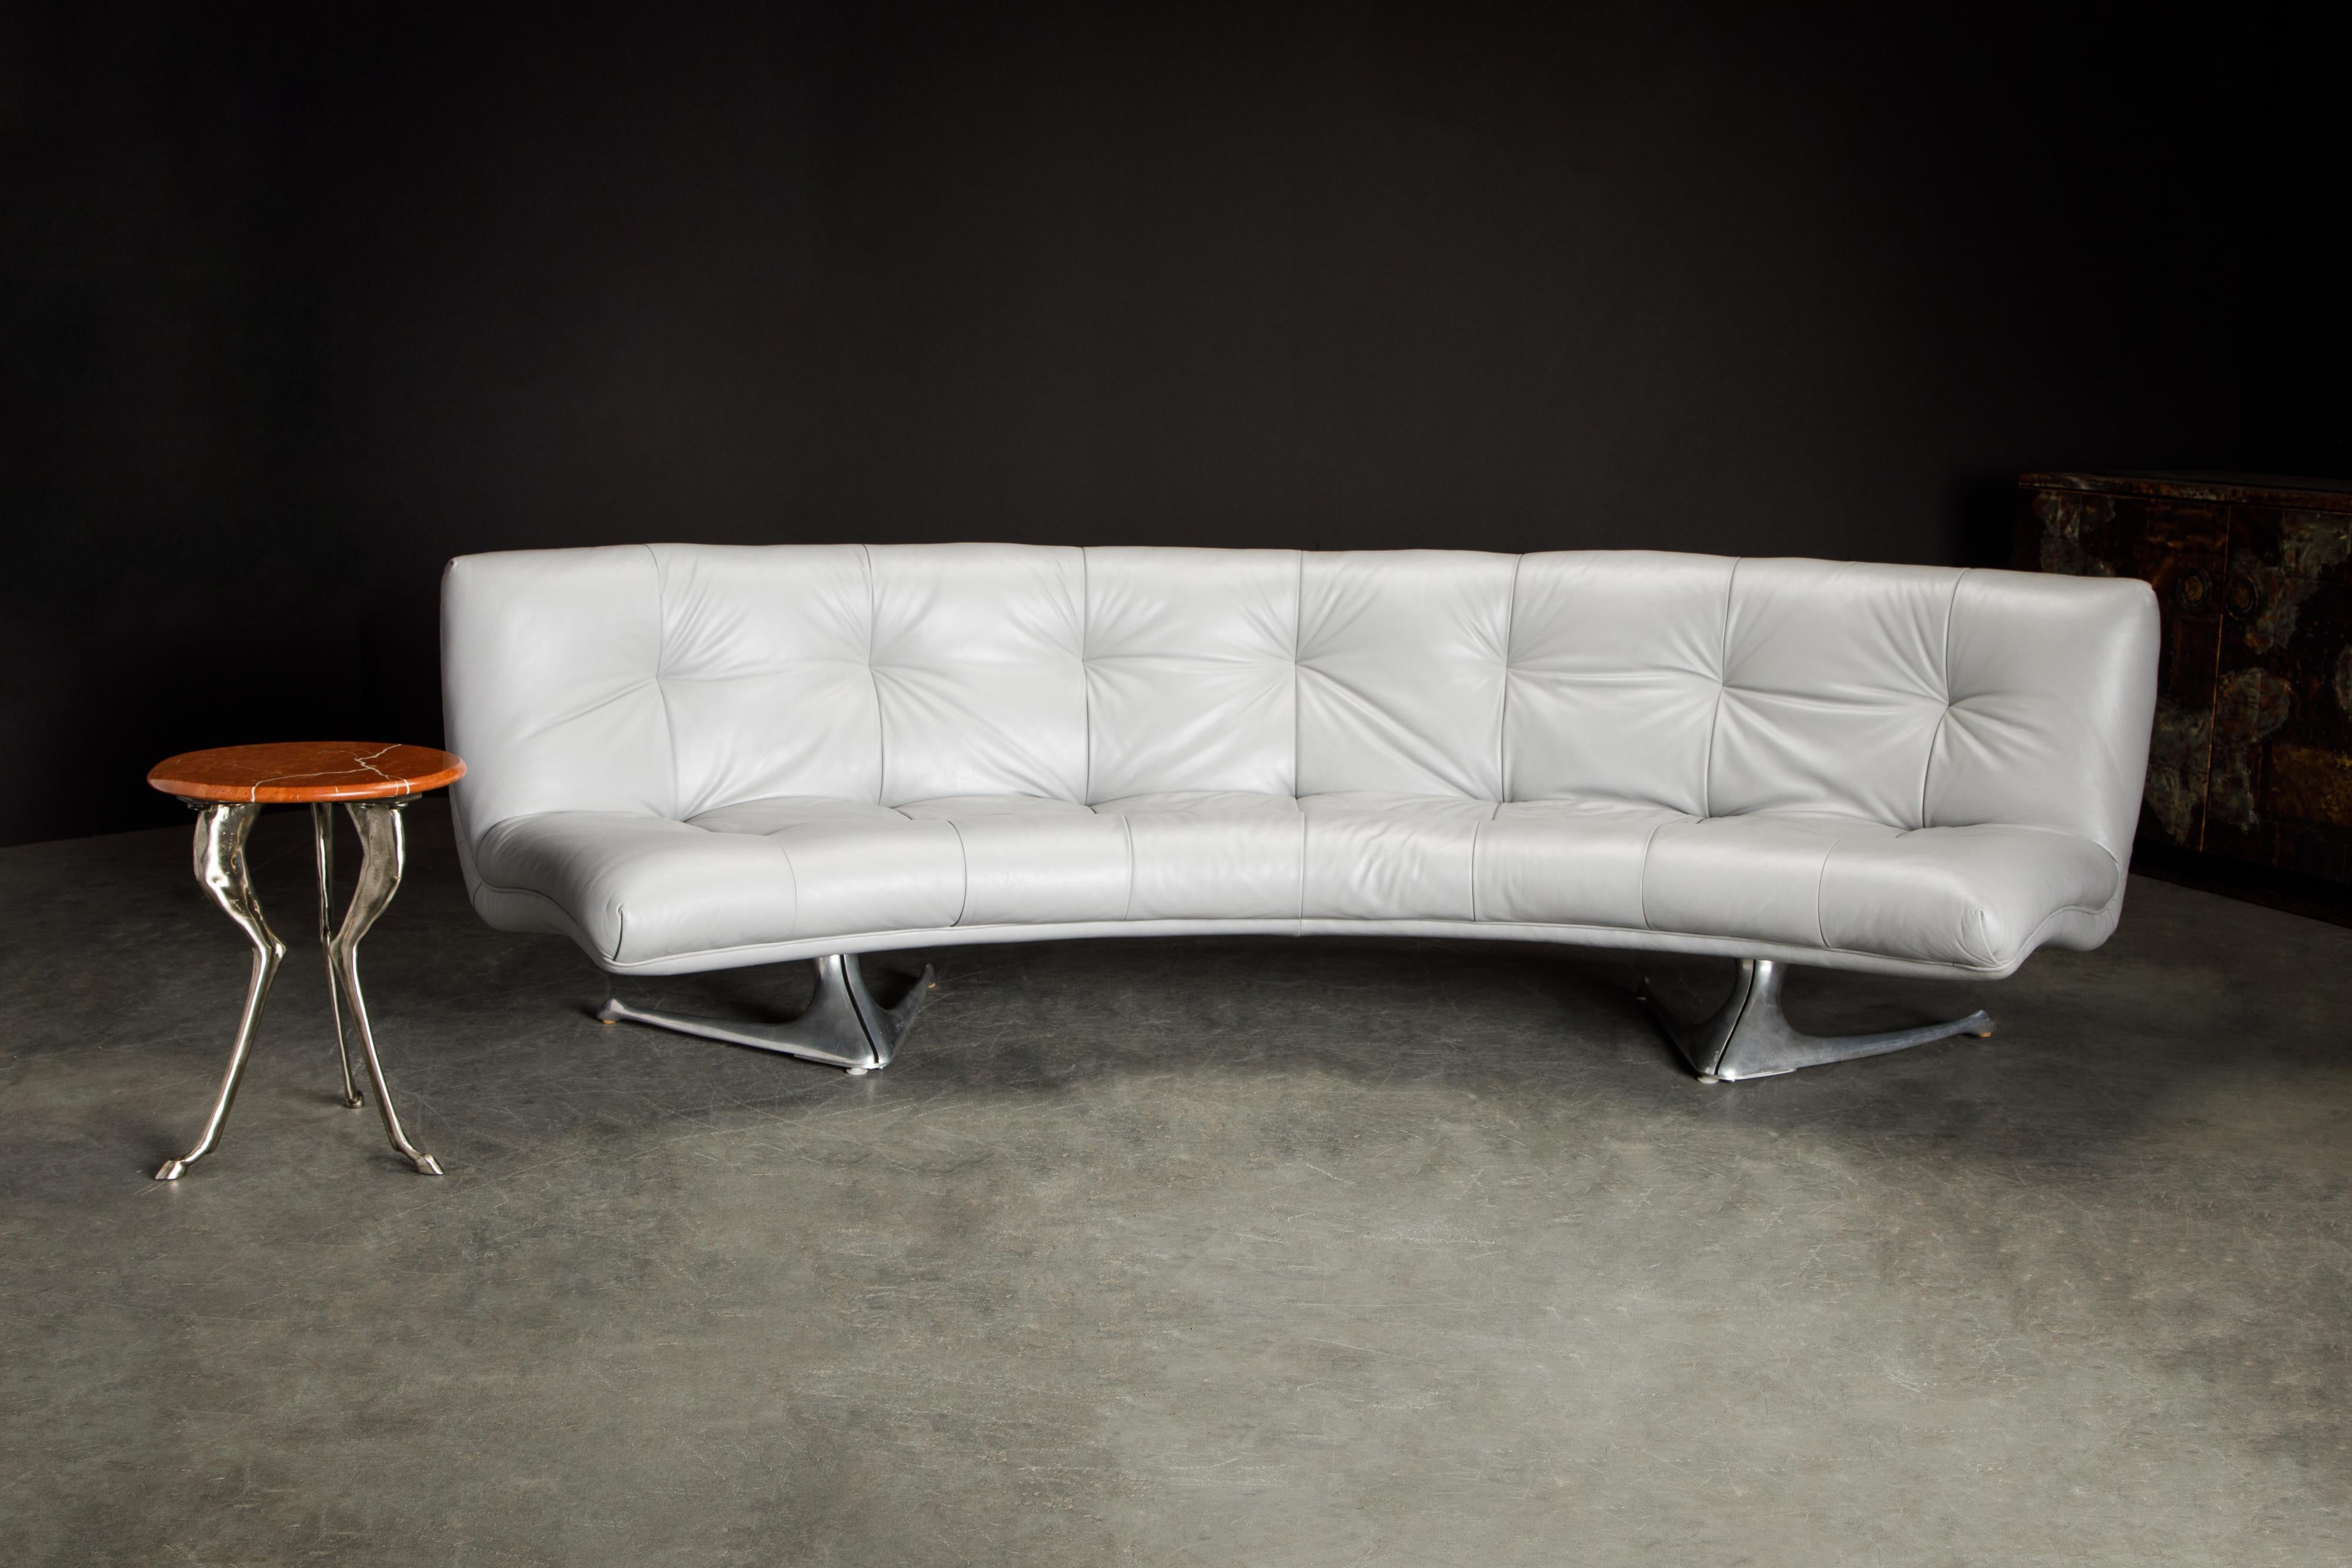 Rare 'Unicorn' Leather and Aluminum Curved Sofa by Vladimir Kagan, c. 1963 For Sale 5